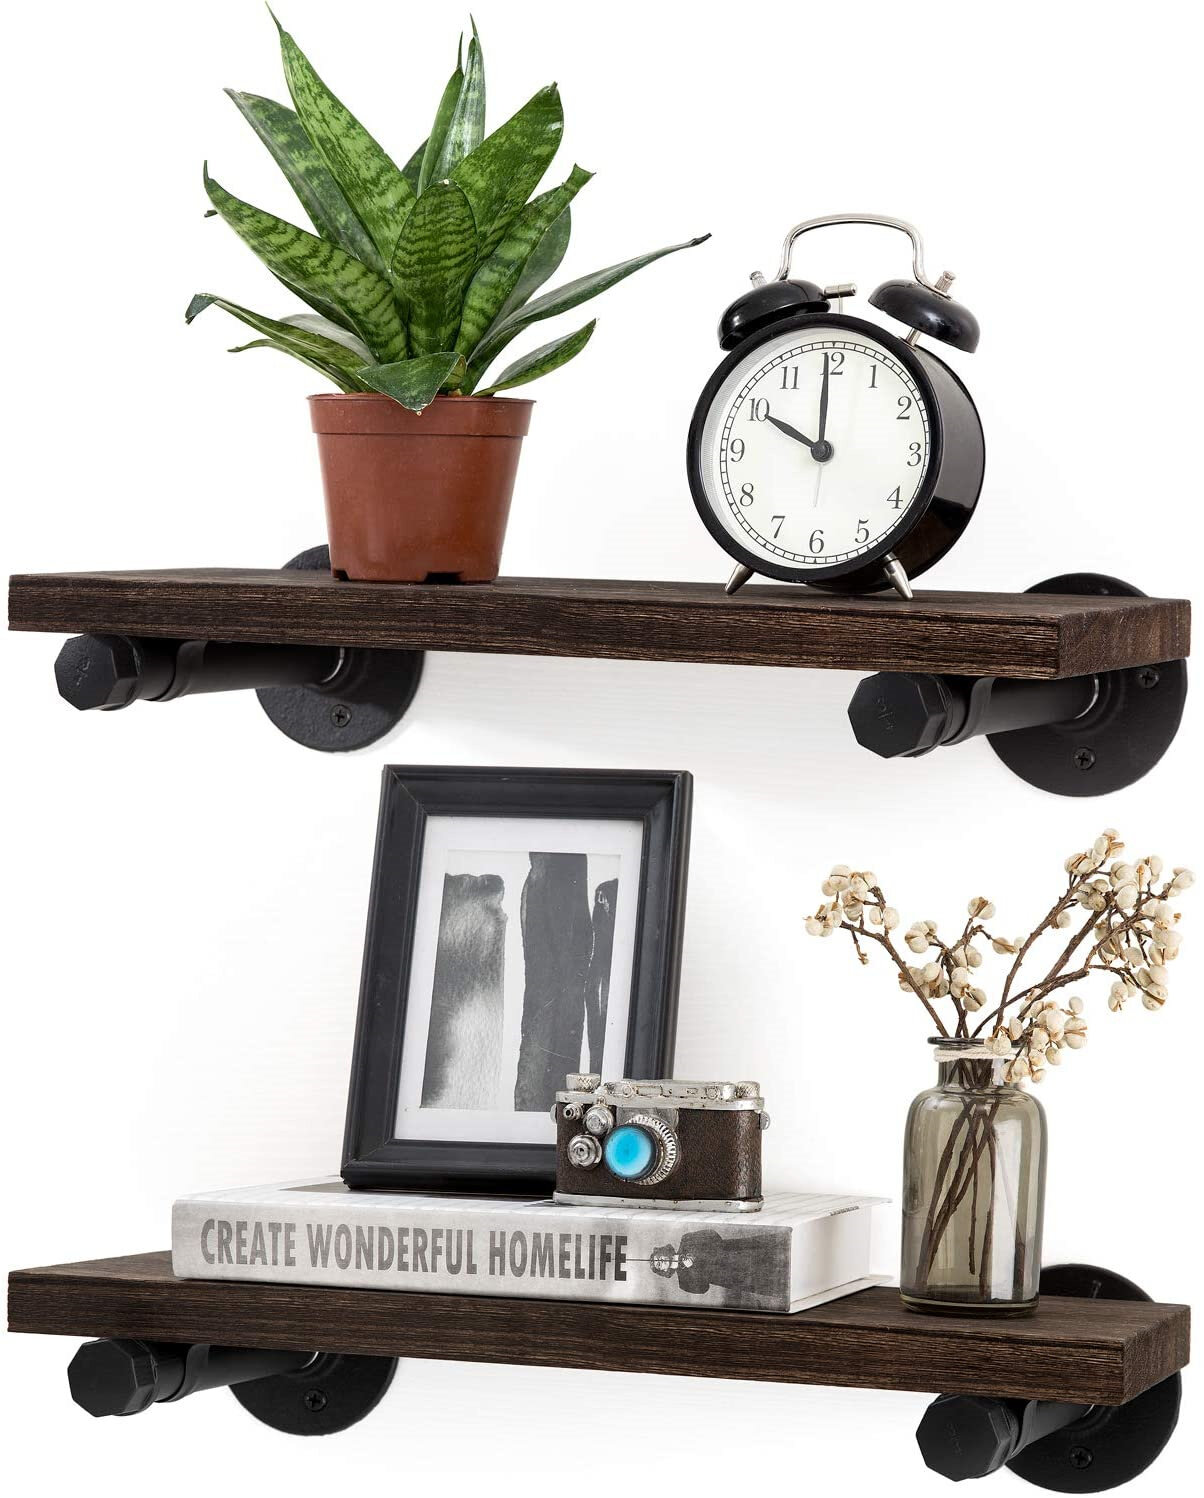 Bathroom Living Room Floating Shelves Wall Mounted Set of 2 Rustic Wood Wall Floating Shelf for Bedroom Office Perfect Home Wall Decorative Kitchen